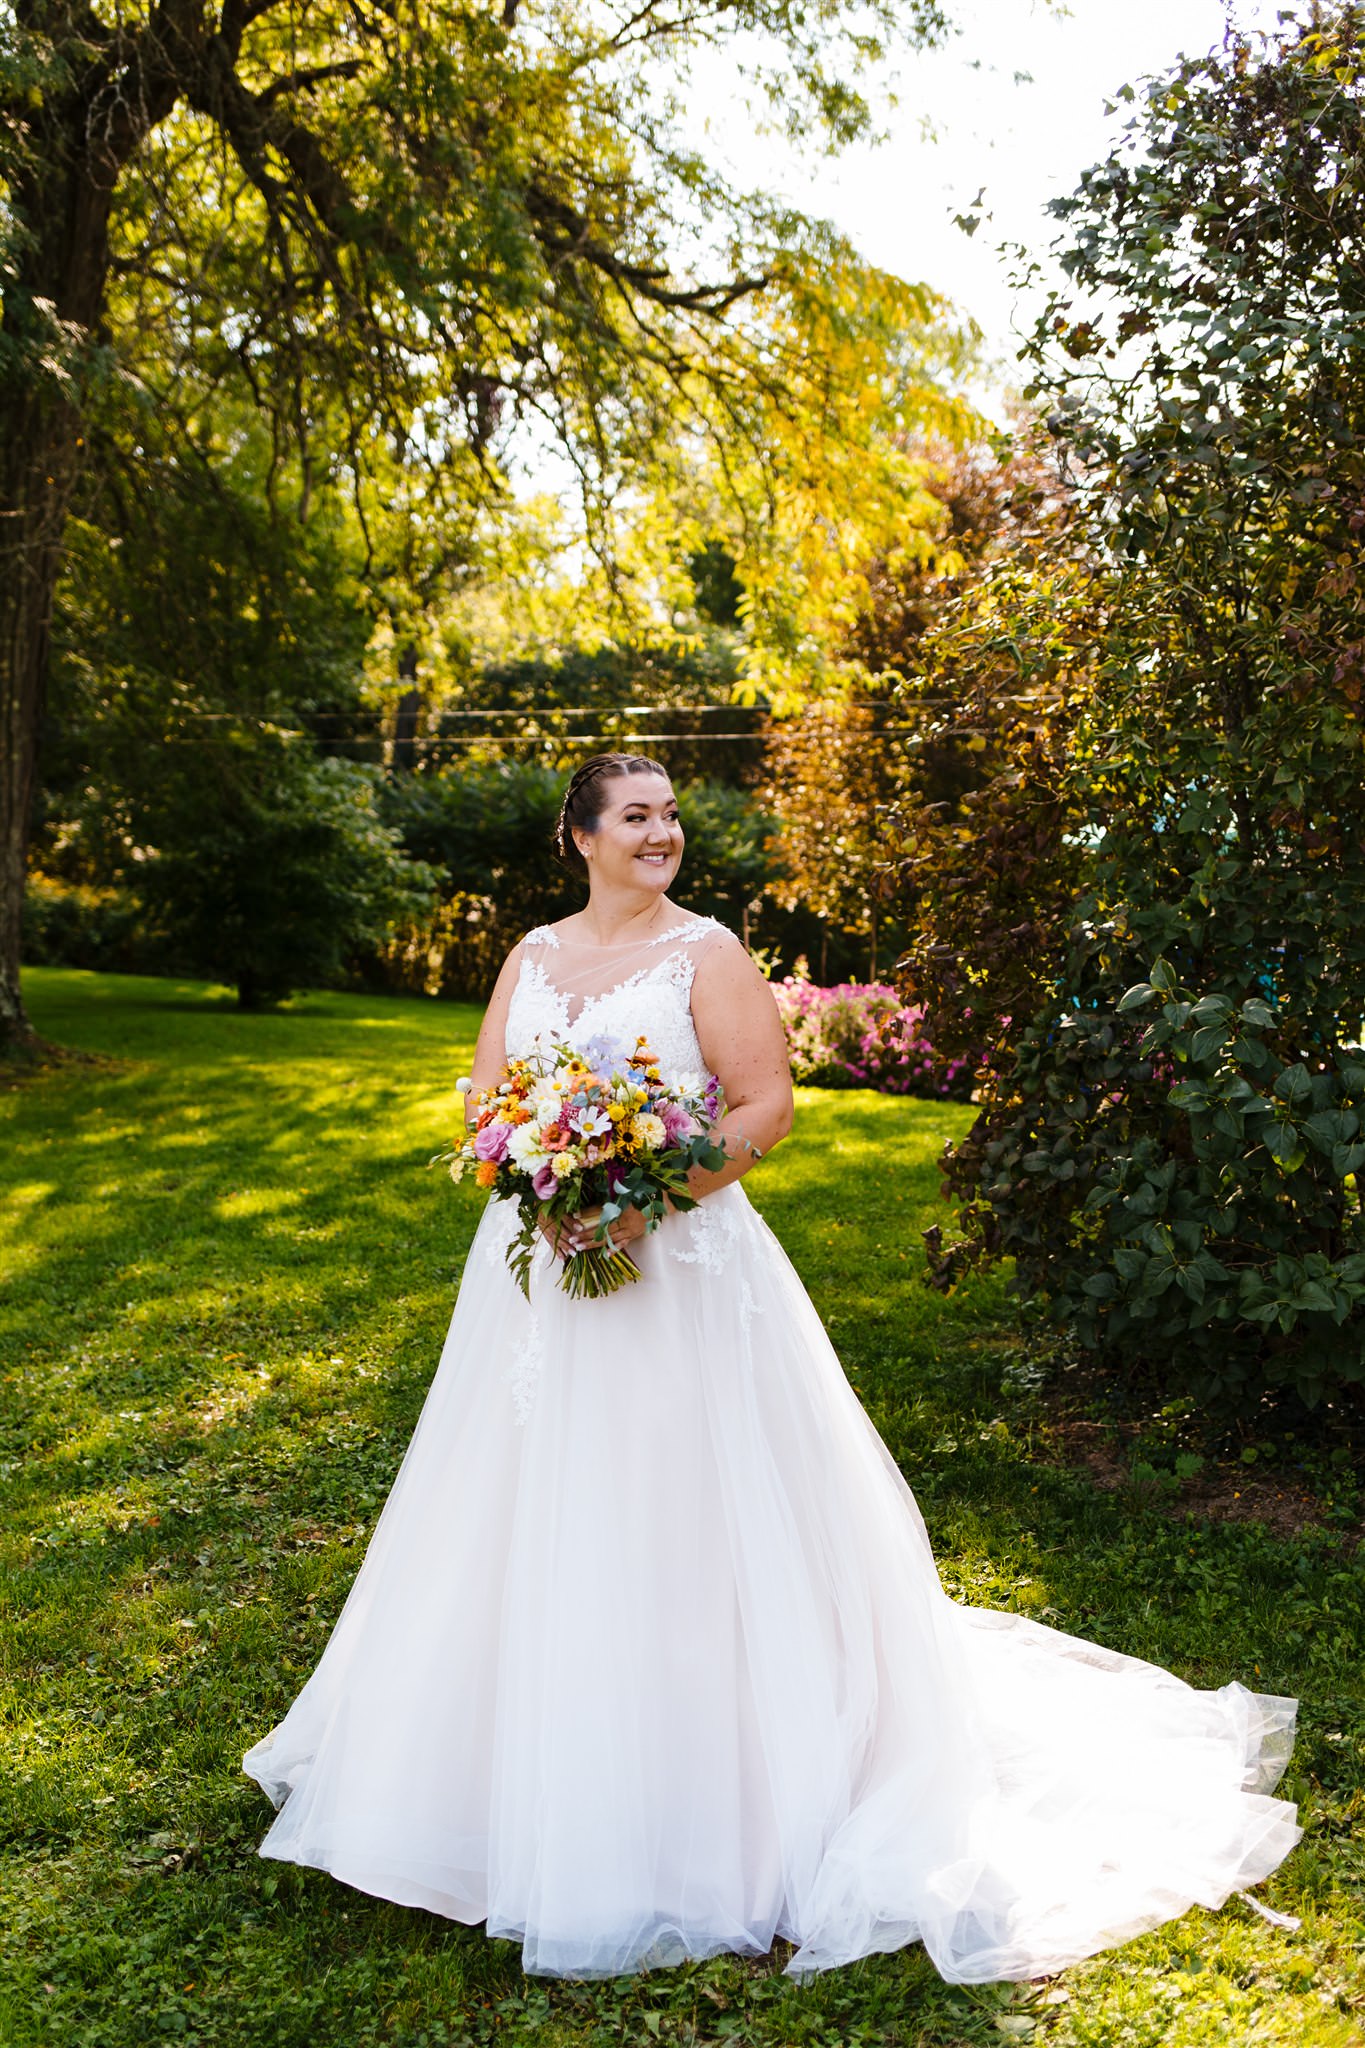 The bride smiles as she holds a colorful bouquet of flowers at her fontainebleau inn wedding.